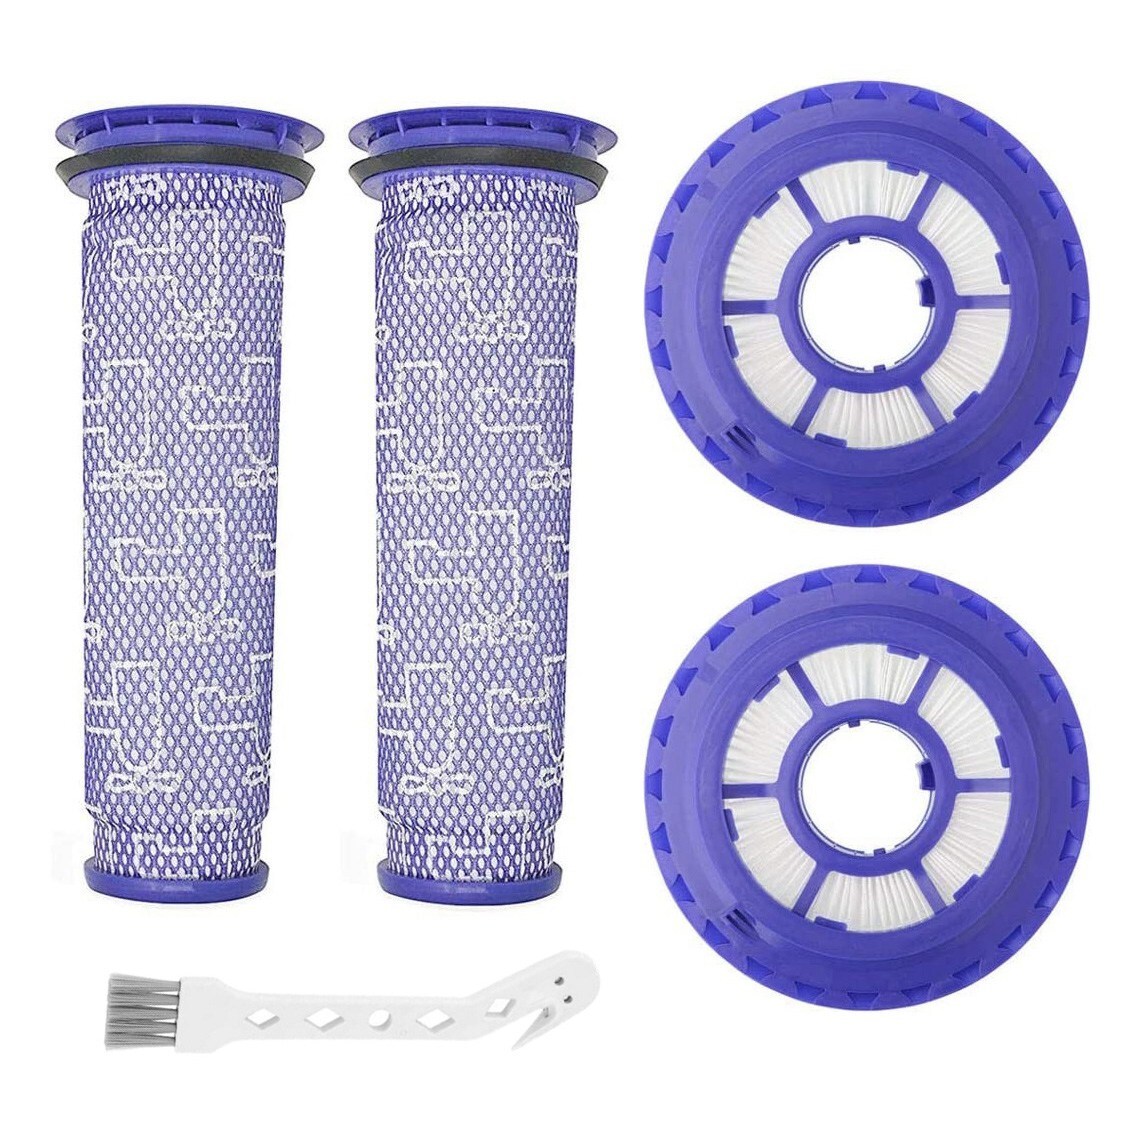 2 Pack pre-Filters and 2 Pack HEPA Post-Filters Replacements compatible Dyson v8 and v7 Cordless Vacuum Cleaners. Post filters